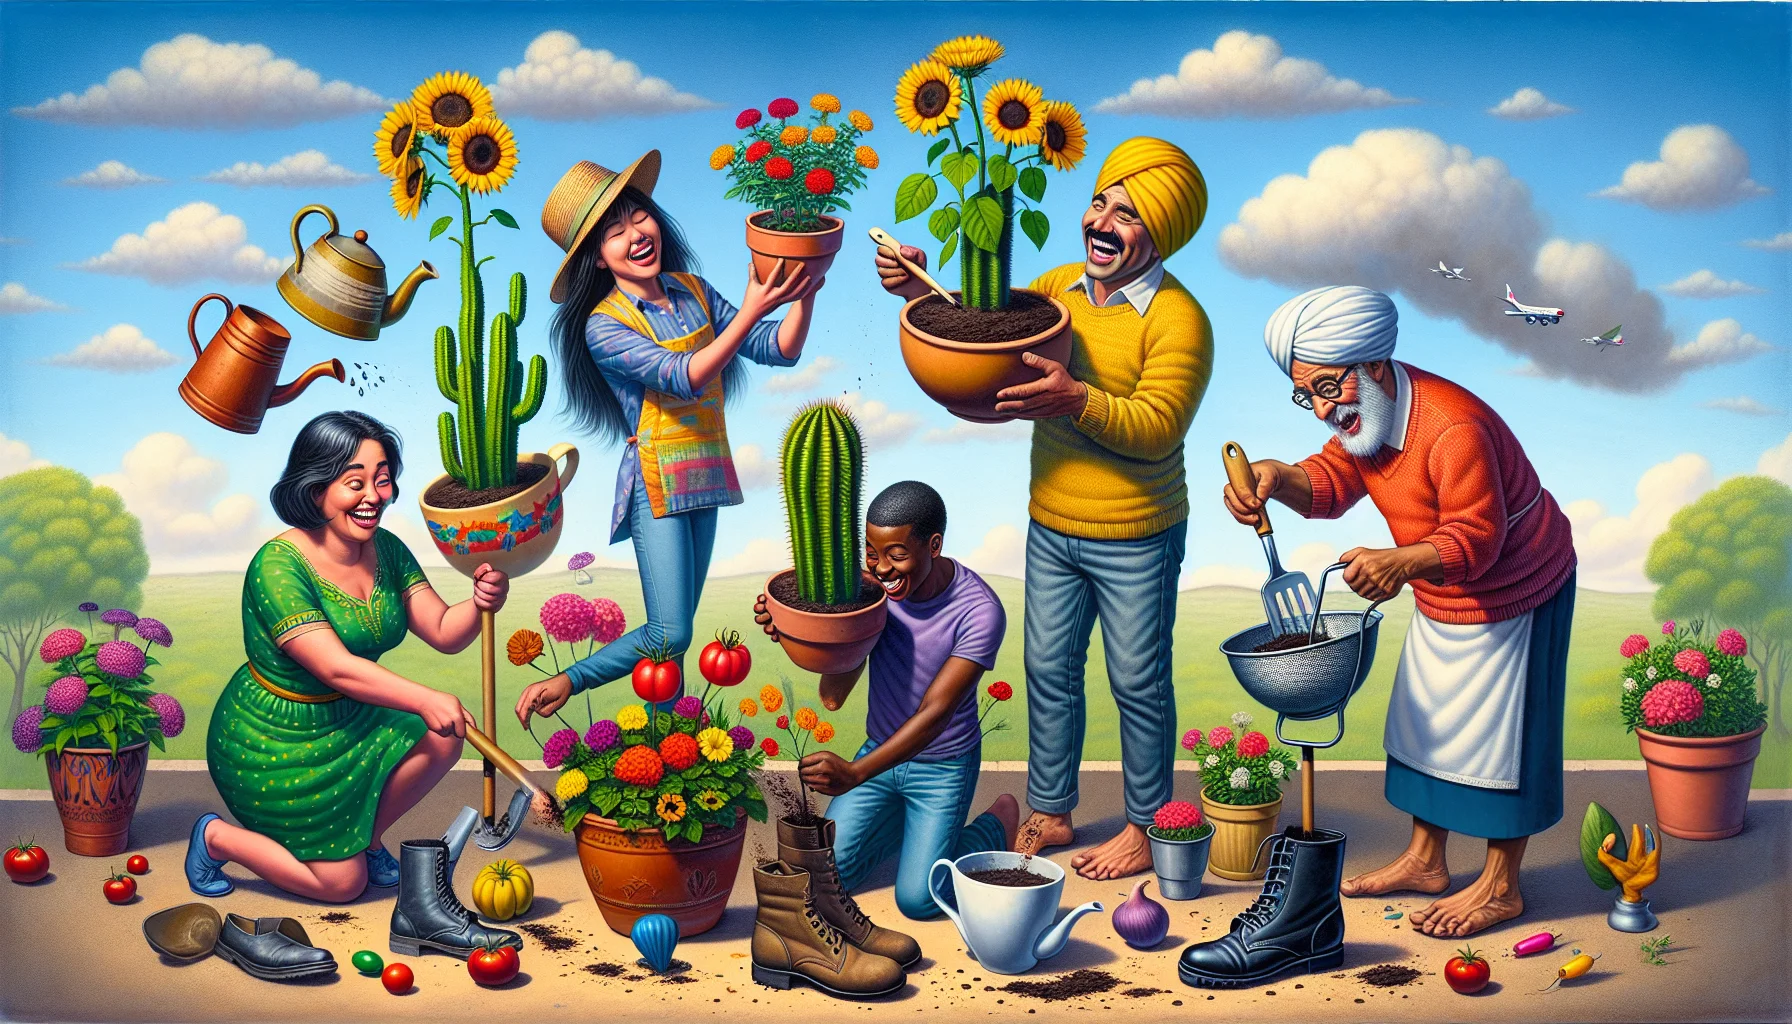 Create a hilarious and captivating piece of art representing a container gardening scene. Picture this: A cheerful Caucasian woman is bafflingly attempting to plant a cactus in a soup ladle, while an amused Hispanic man is planting sunflowers in old boots. A curious South Asian child is overflowing a teapot with marigolds, while a Black teenager fills a colander with vibrant pansies dubiously. A Middle-Eastern older gentleman is gingerly balancing a tomato plant in a football helmet. Let this not-so-conventional scenery serve as light-hearted design tips for container gardening, encouraging everyone to engage in this delightful hobby.